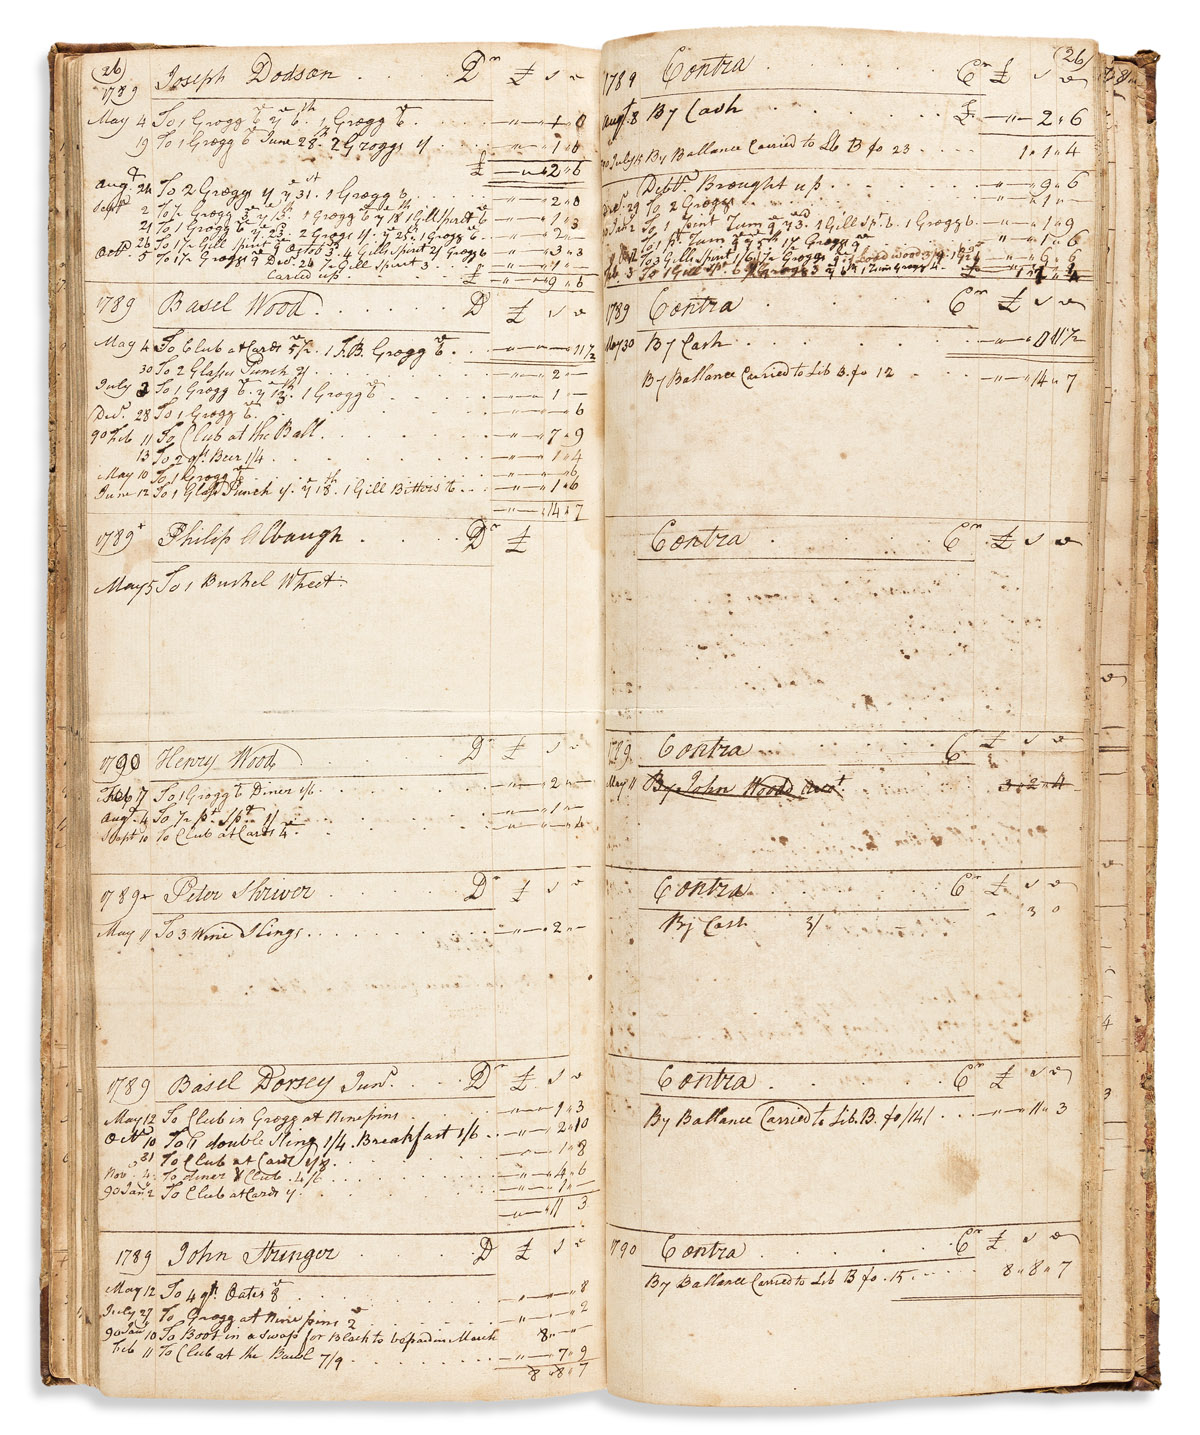 (MARYLAND.) Pair of tavern ledgers from Frederick County.